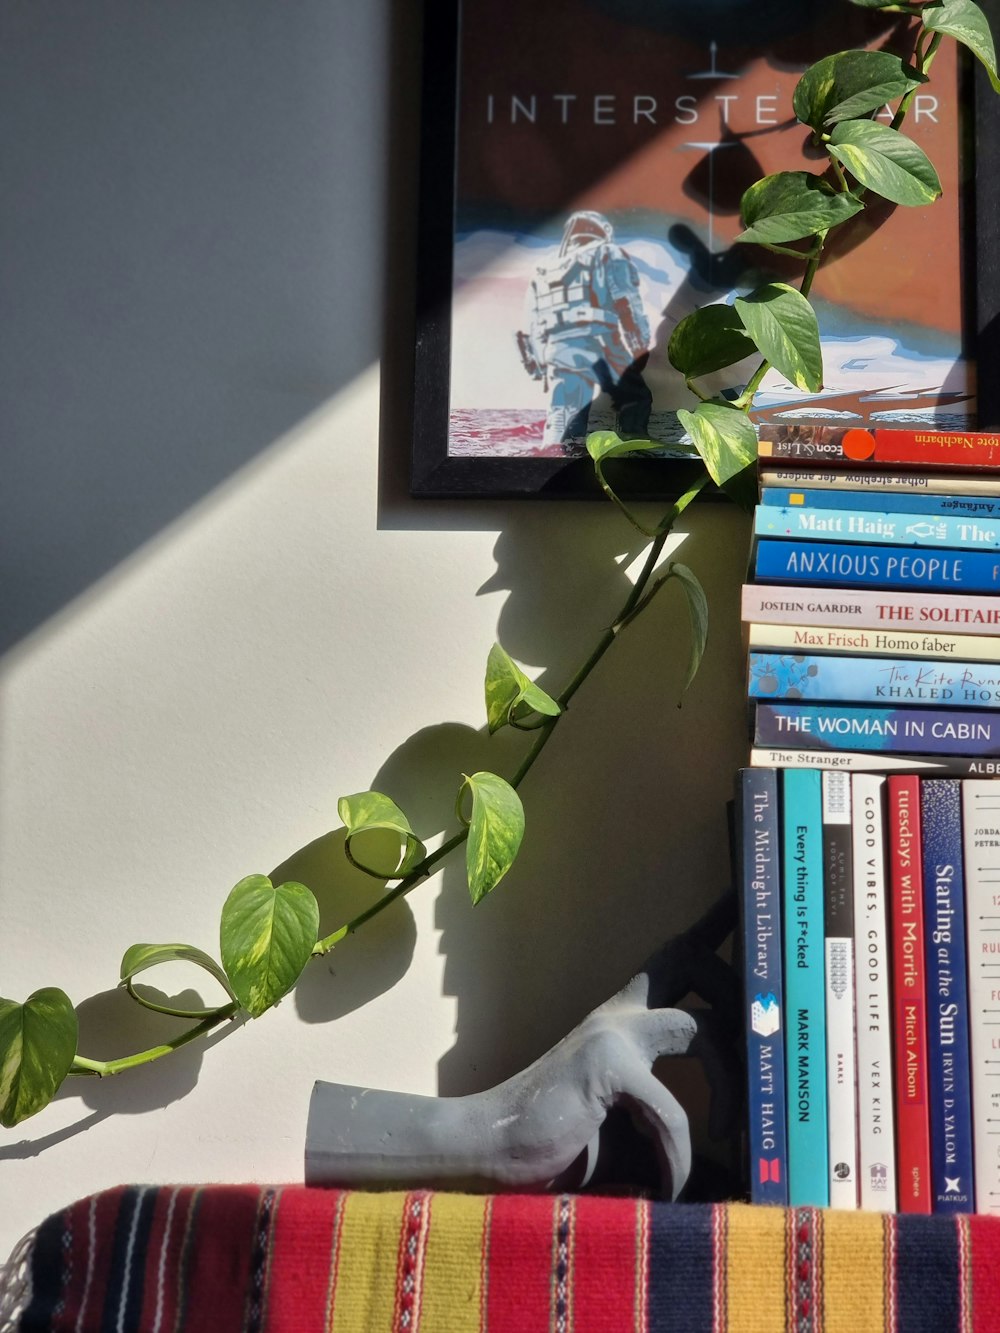 a picture of a plant and some books